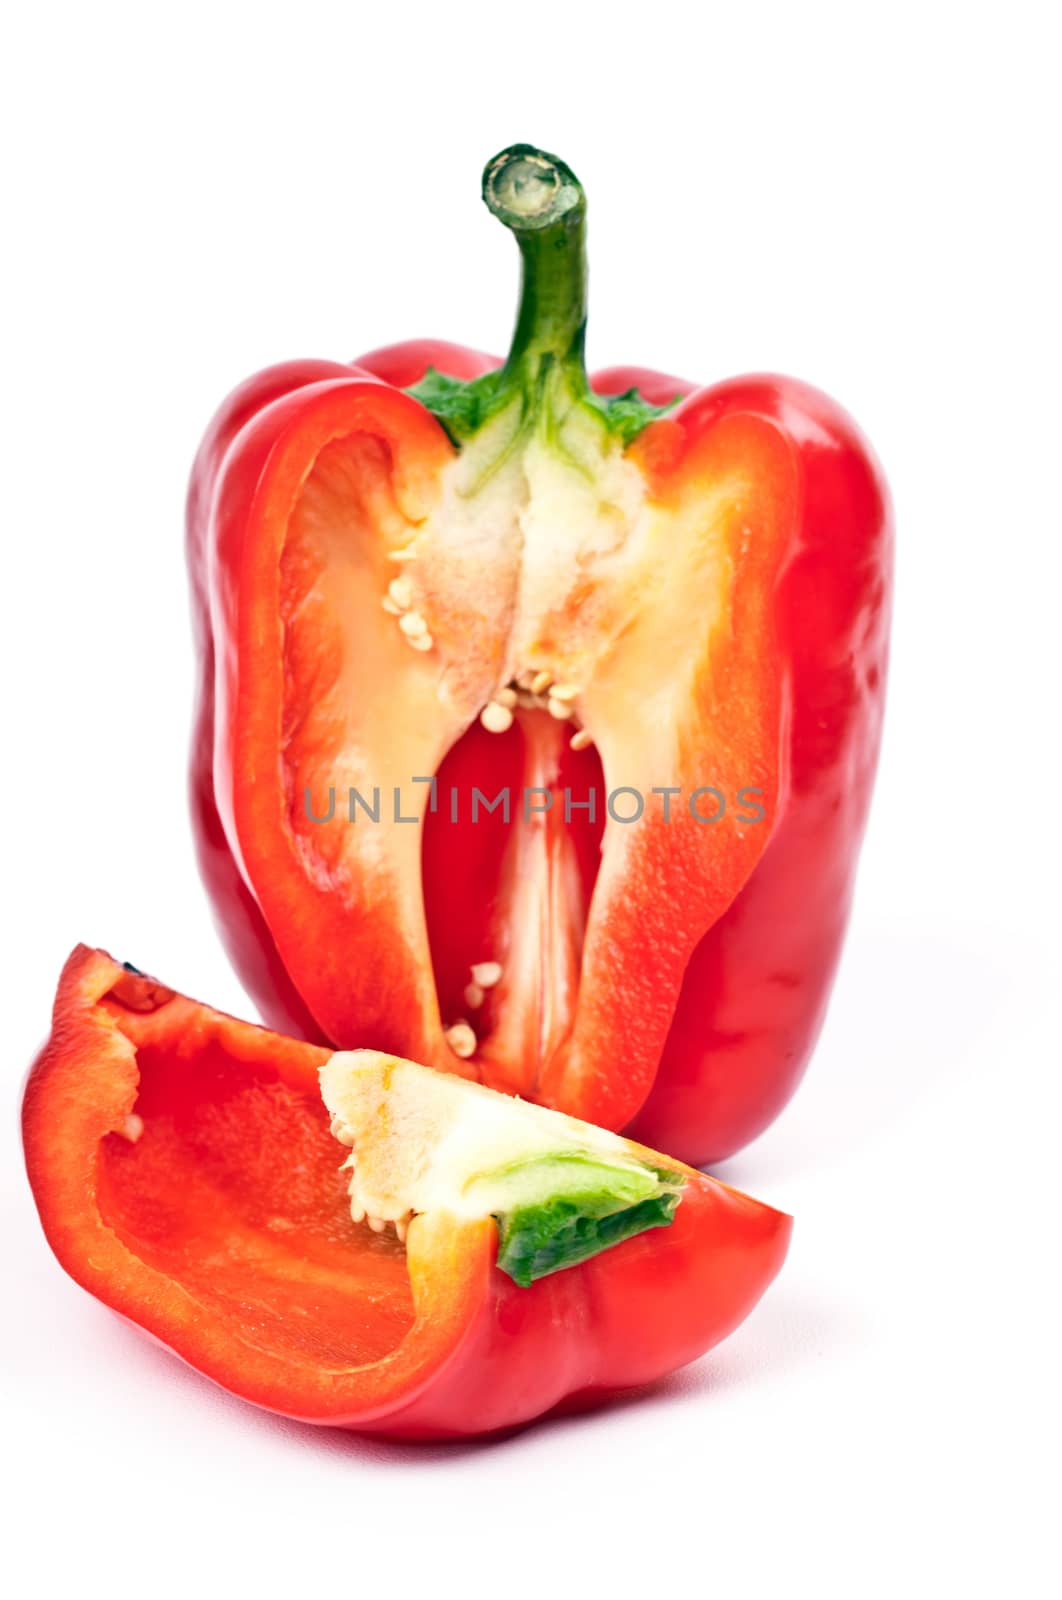 fresh red peppers in the context of by aziatik13